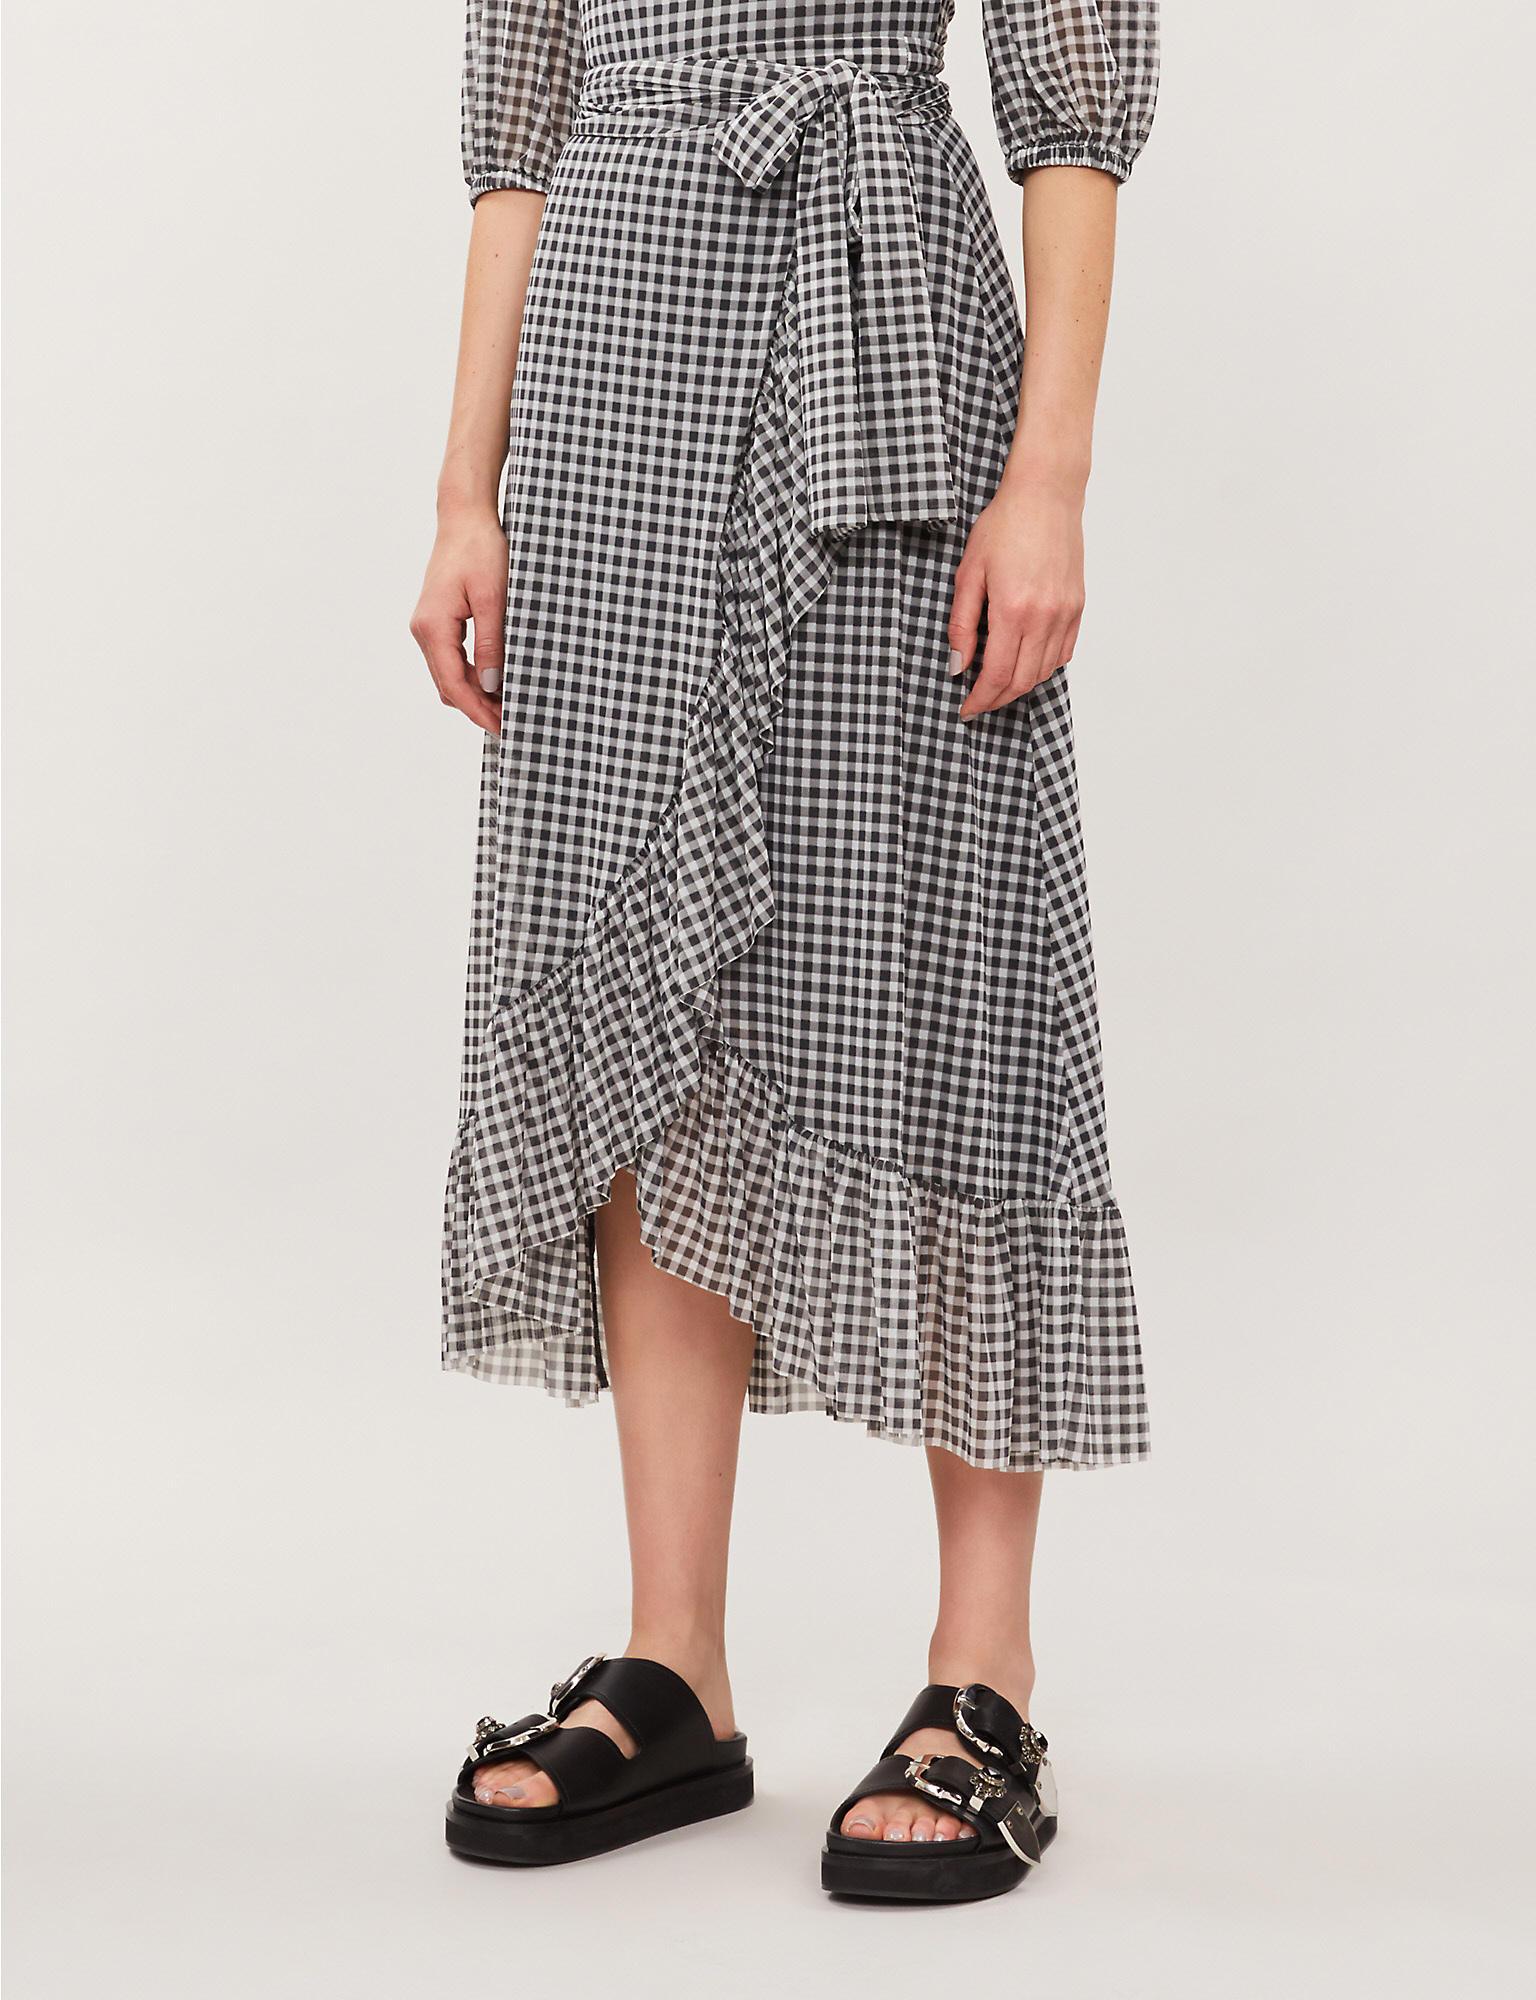 Ganni Synthetic Gingham Crepe Wrap Skirt in Black - Lyst